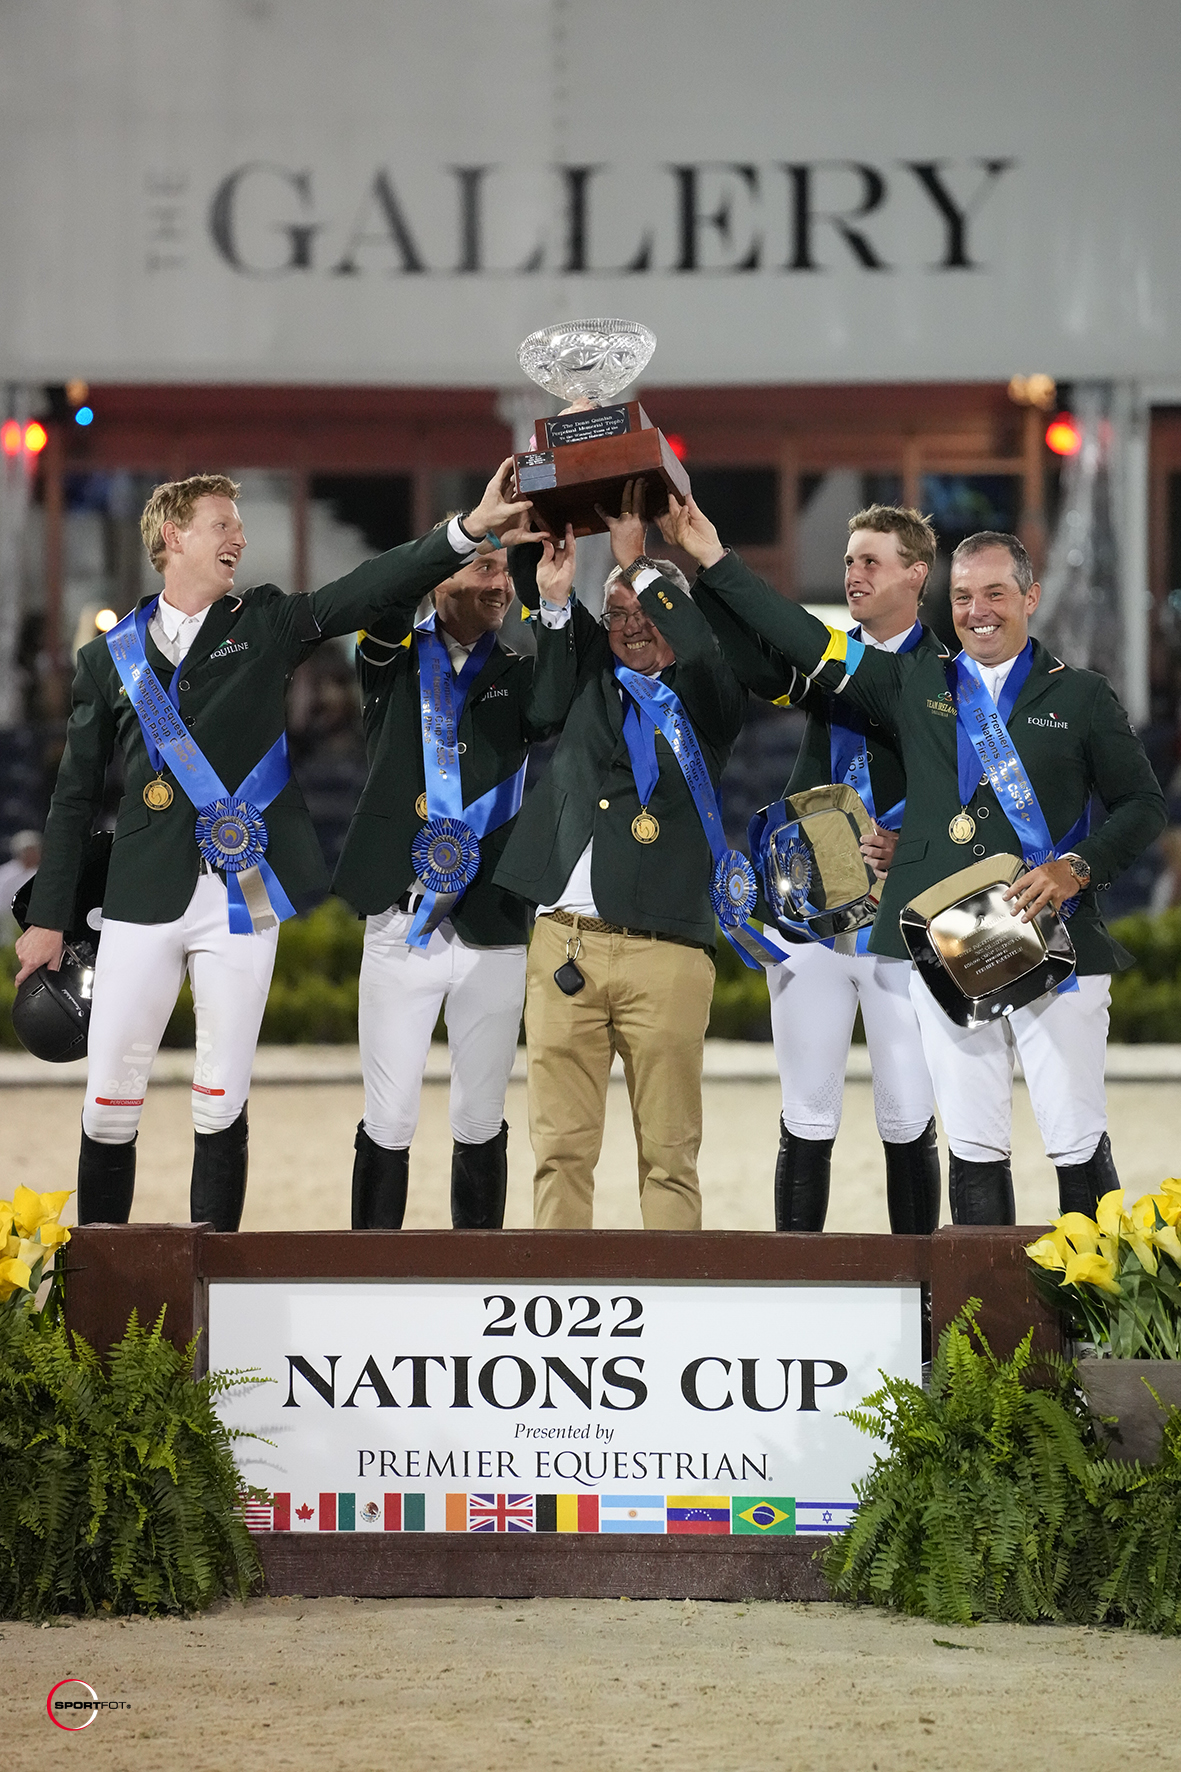 Ireland Takes Home Victory in $150,000 Nations Cup CSIO4*, Presented by Premier Equestrian